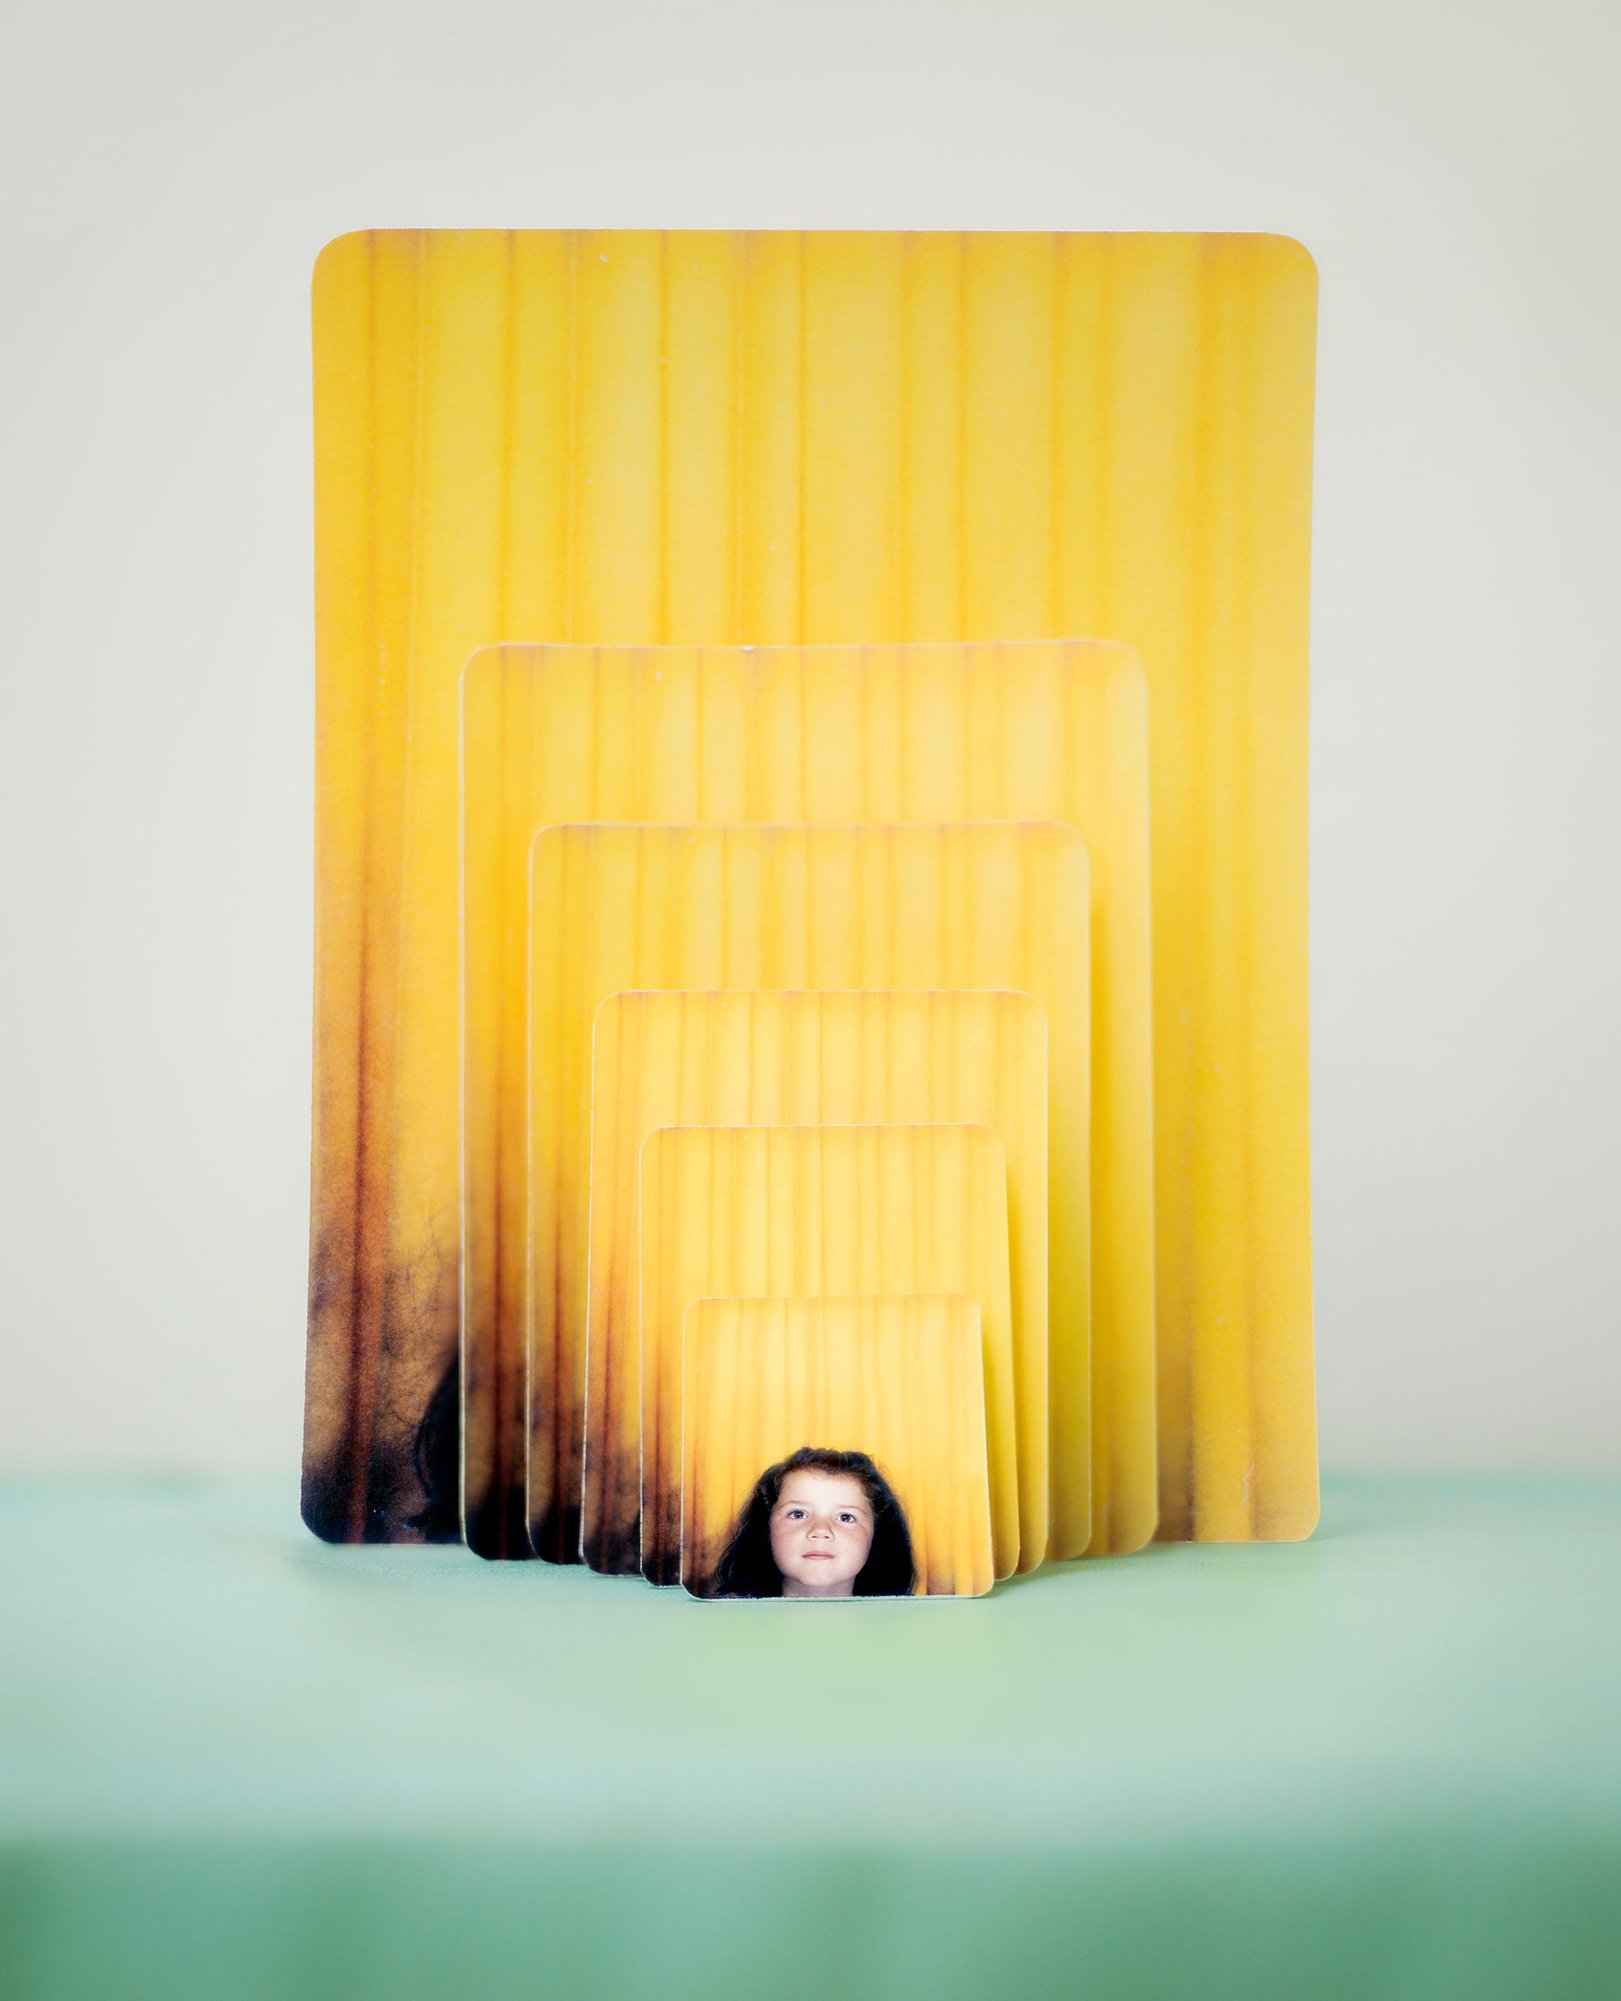 The same photo of a girl in front of a yellow curtain, printed in different sizes and displayed in a cascade.